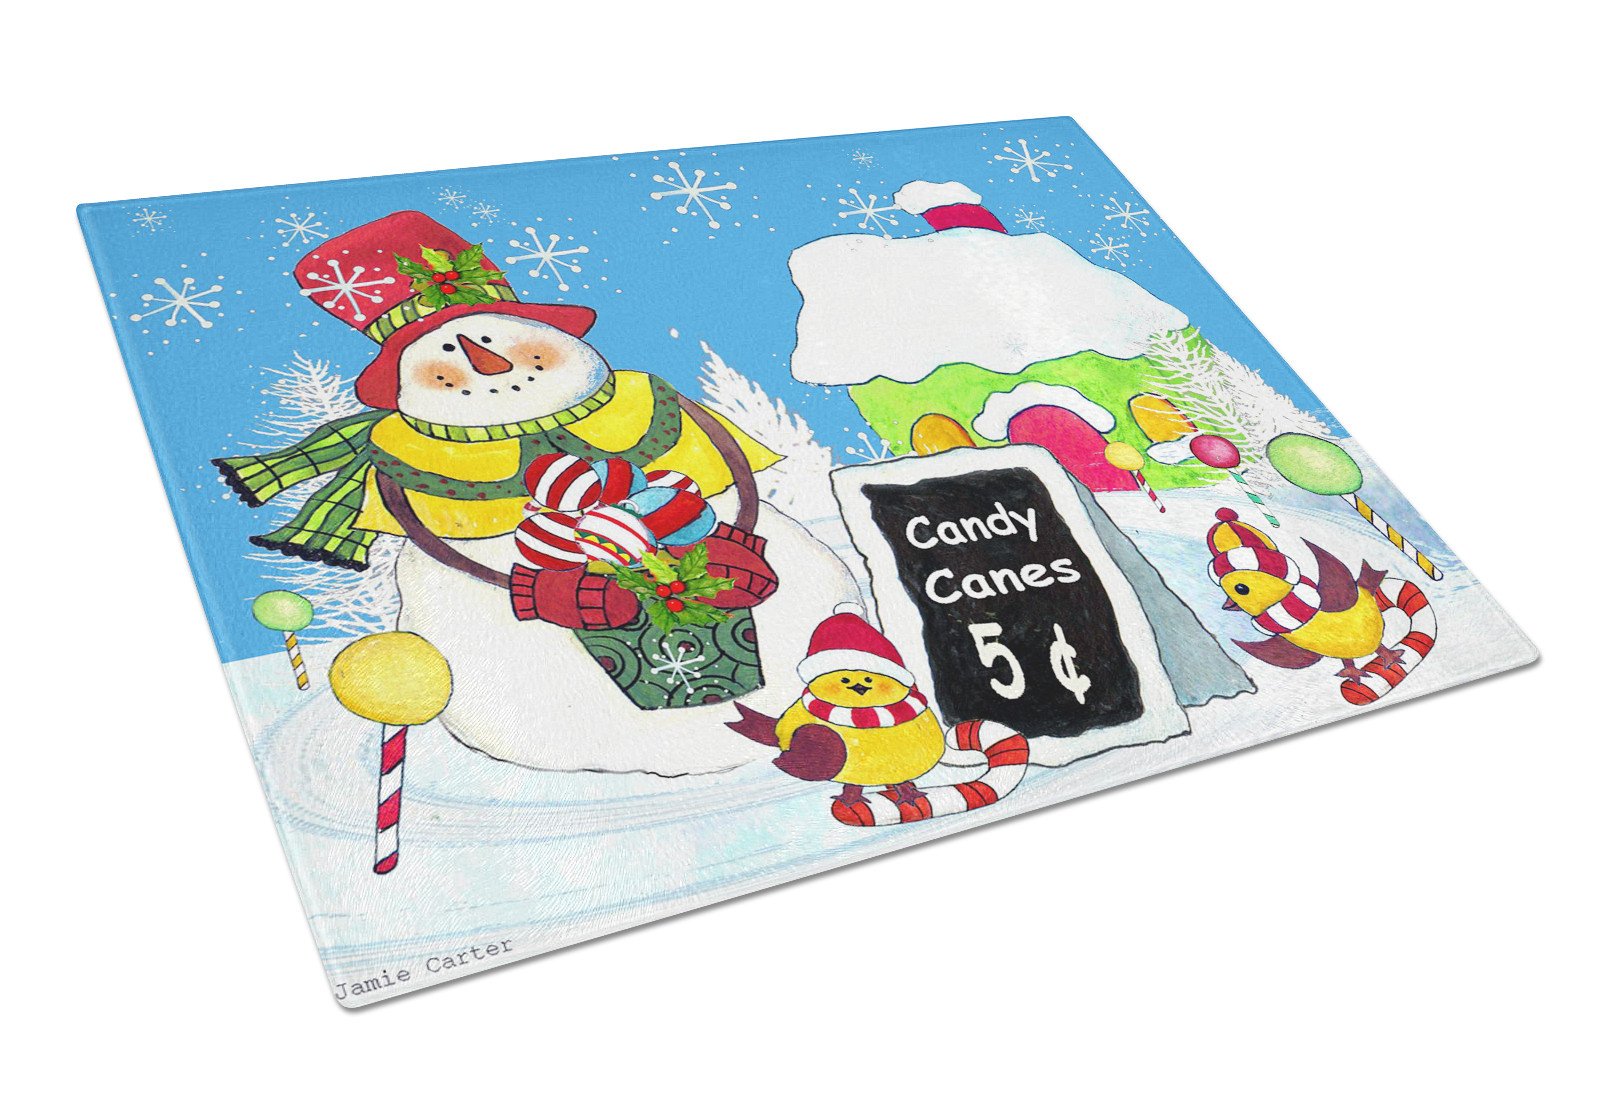 Candy Canes for Sale Snowman Glass Cutting Board Large PJC1076LCB by Caroline's Treasures